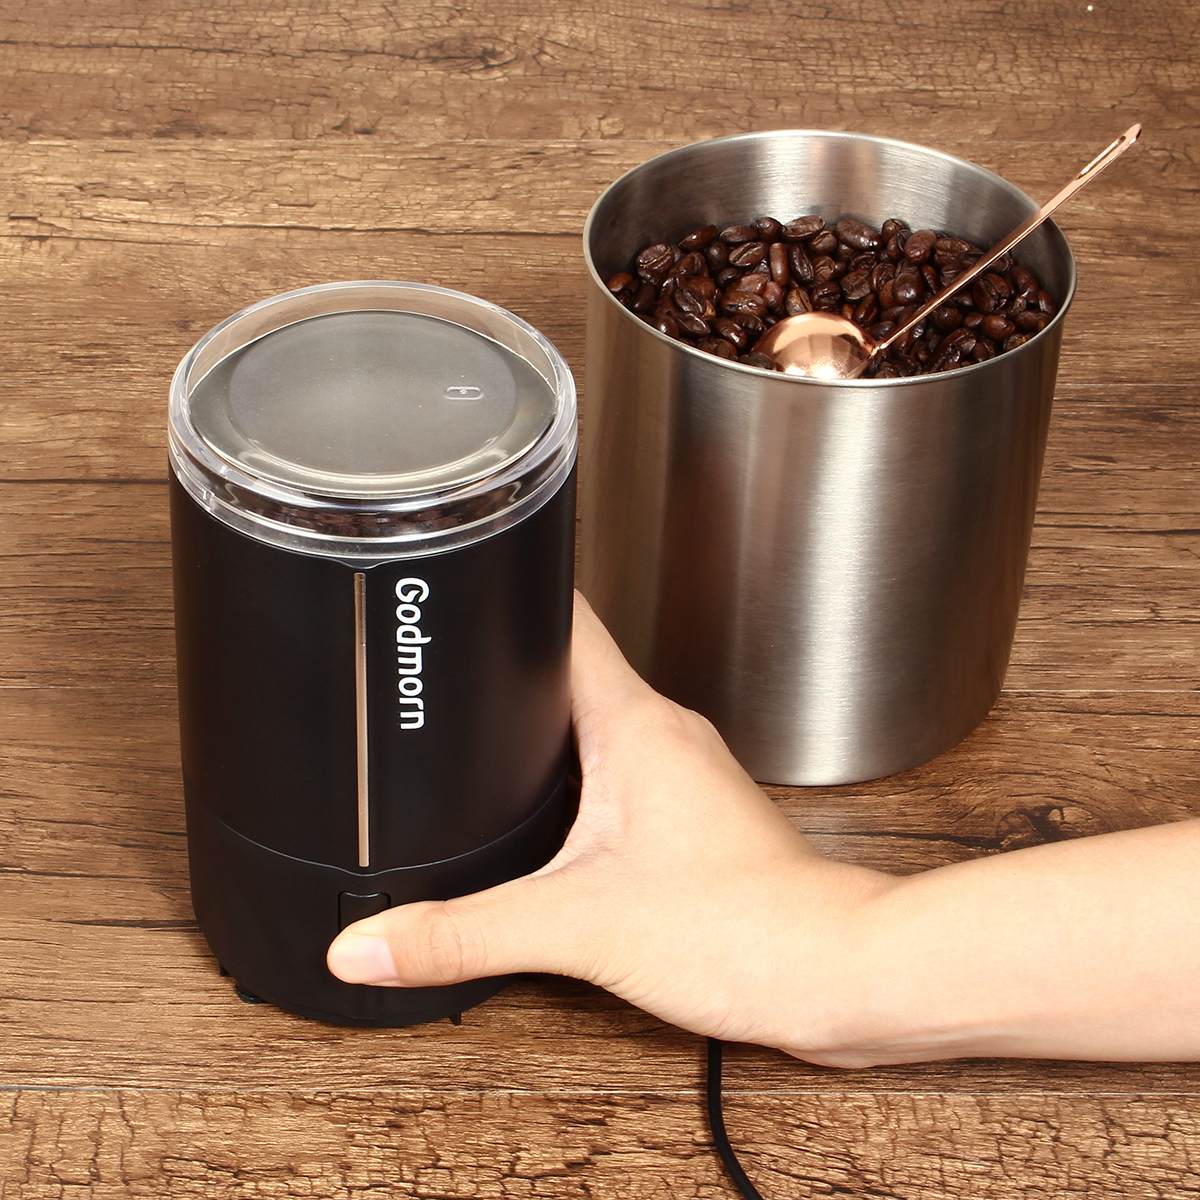 Electric Coffee Grinder Espresso Grinder One Touch Multi-function Bean Grinder Auto Shut Off & Overheating Protection 18